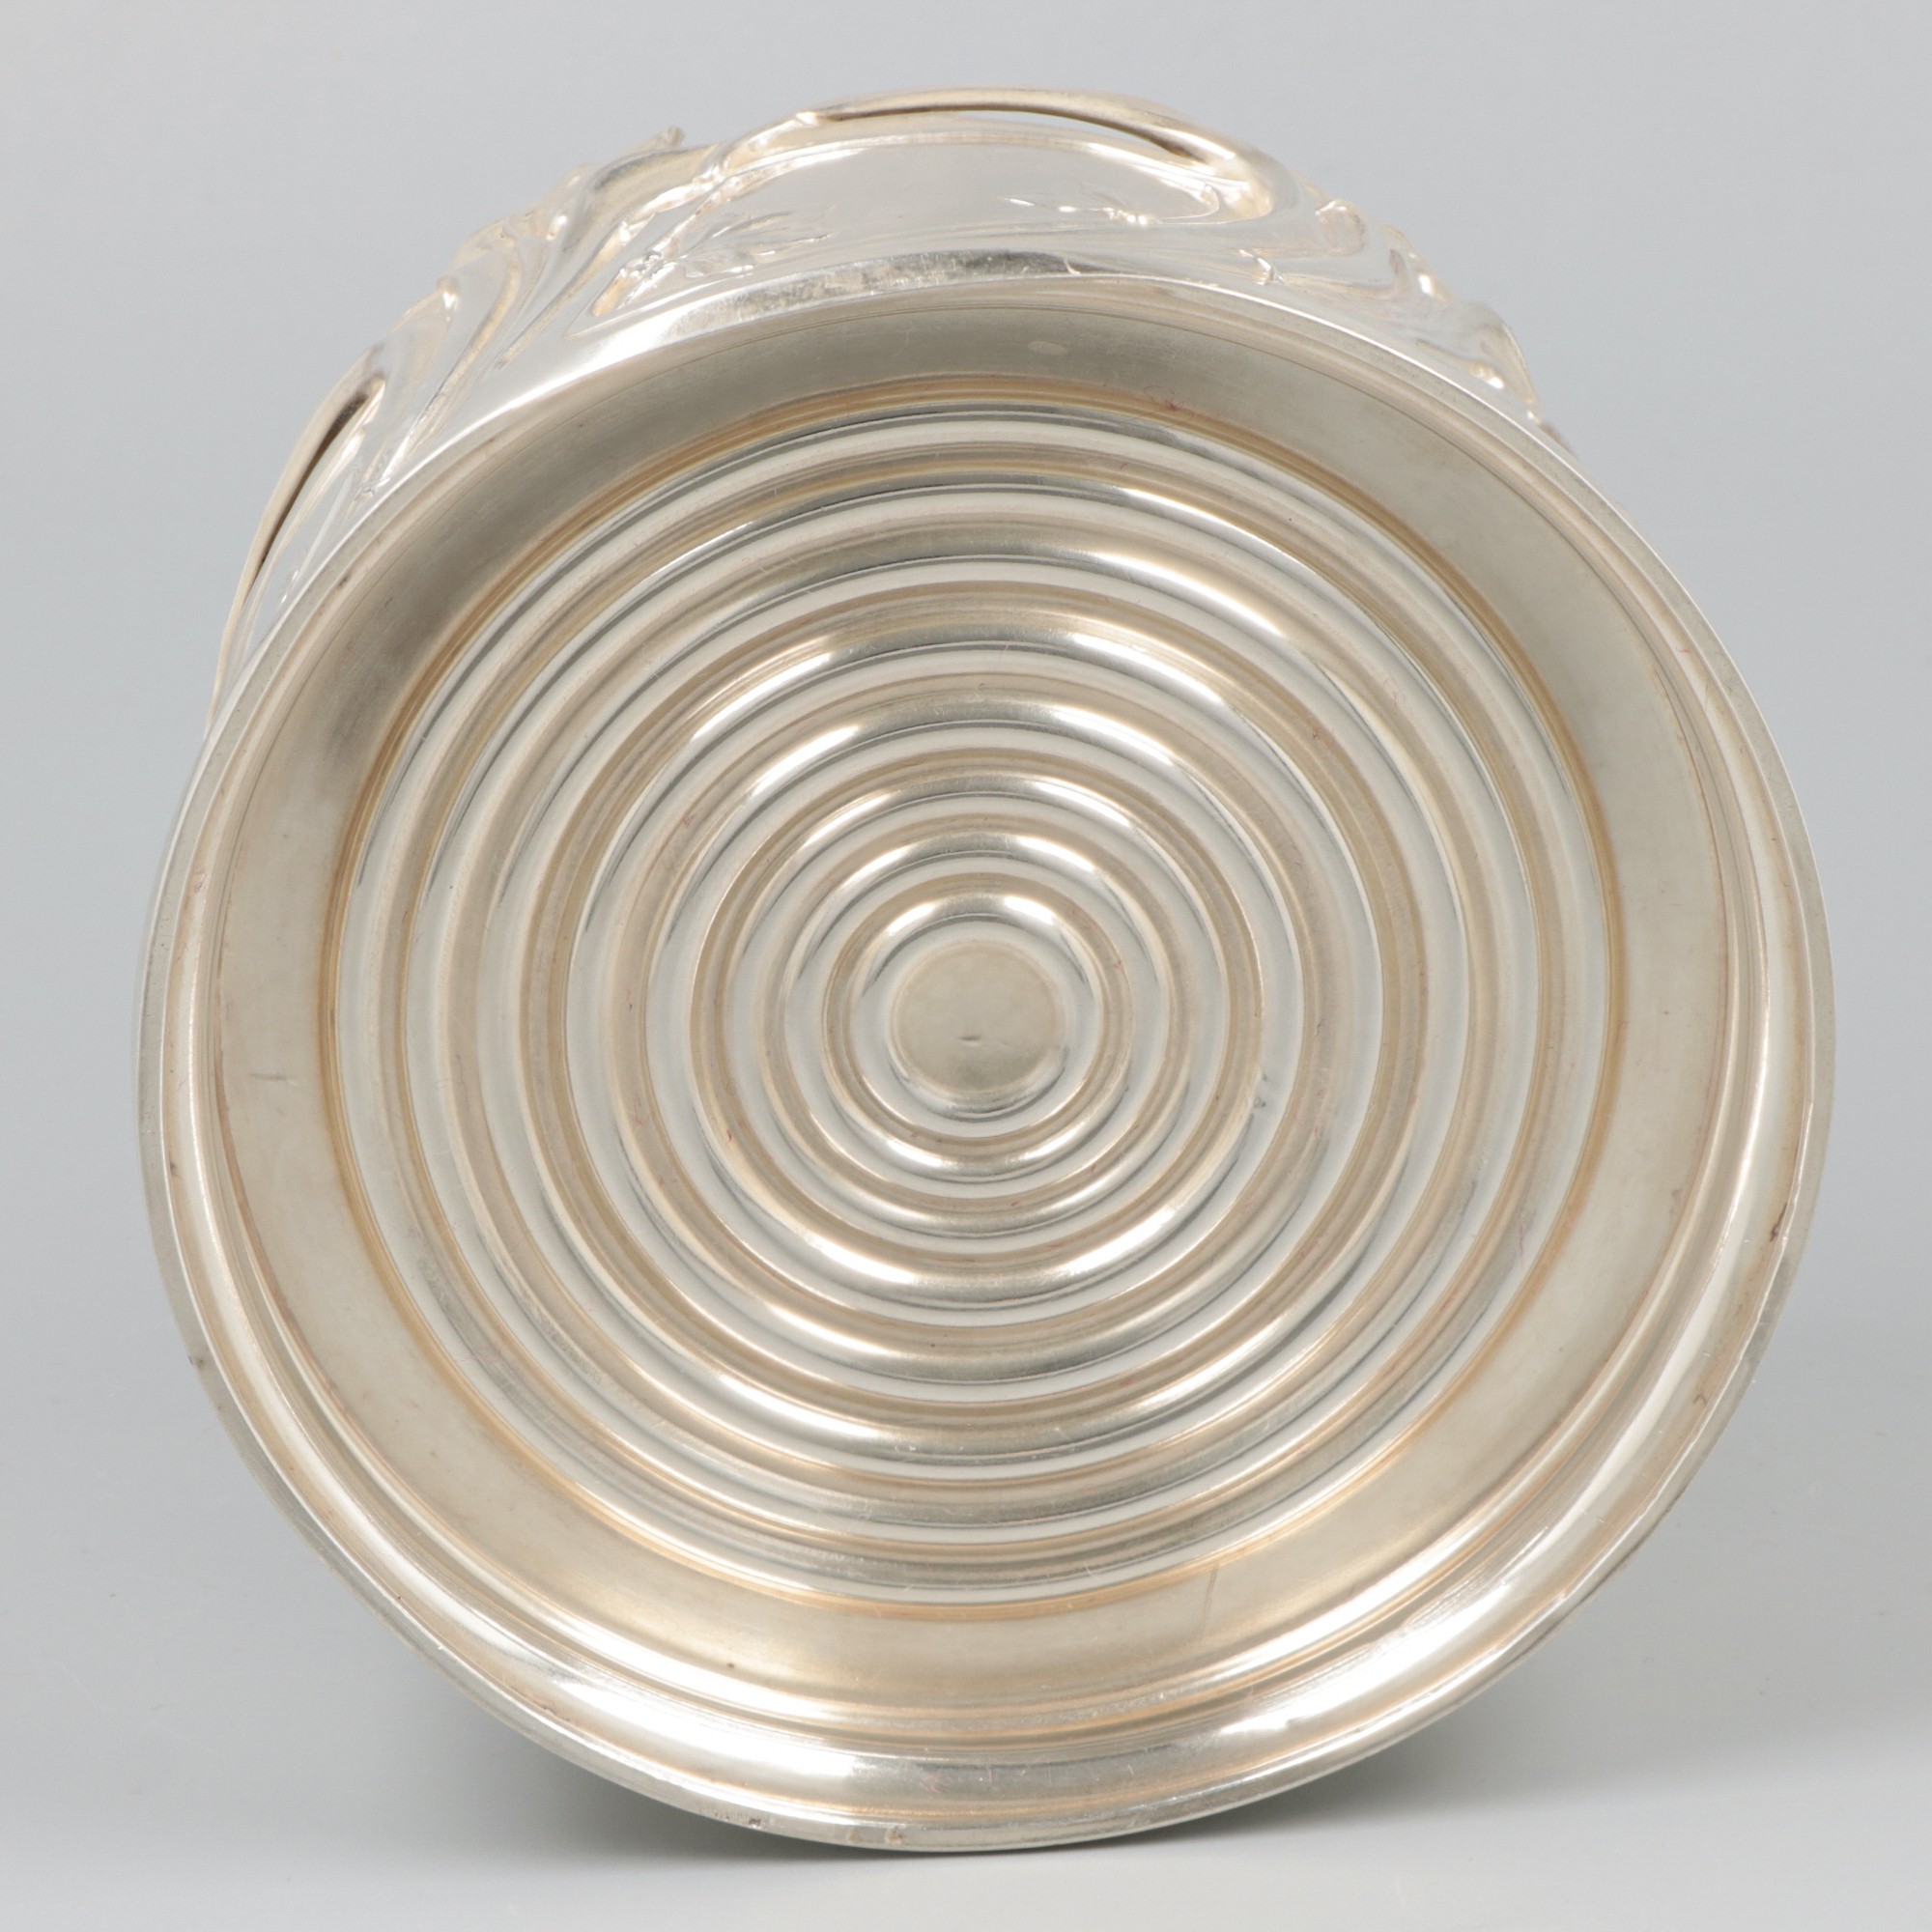 Bottle tray silver. - Image 4 of 5